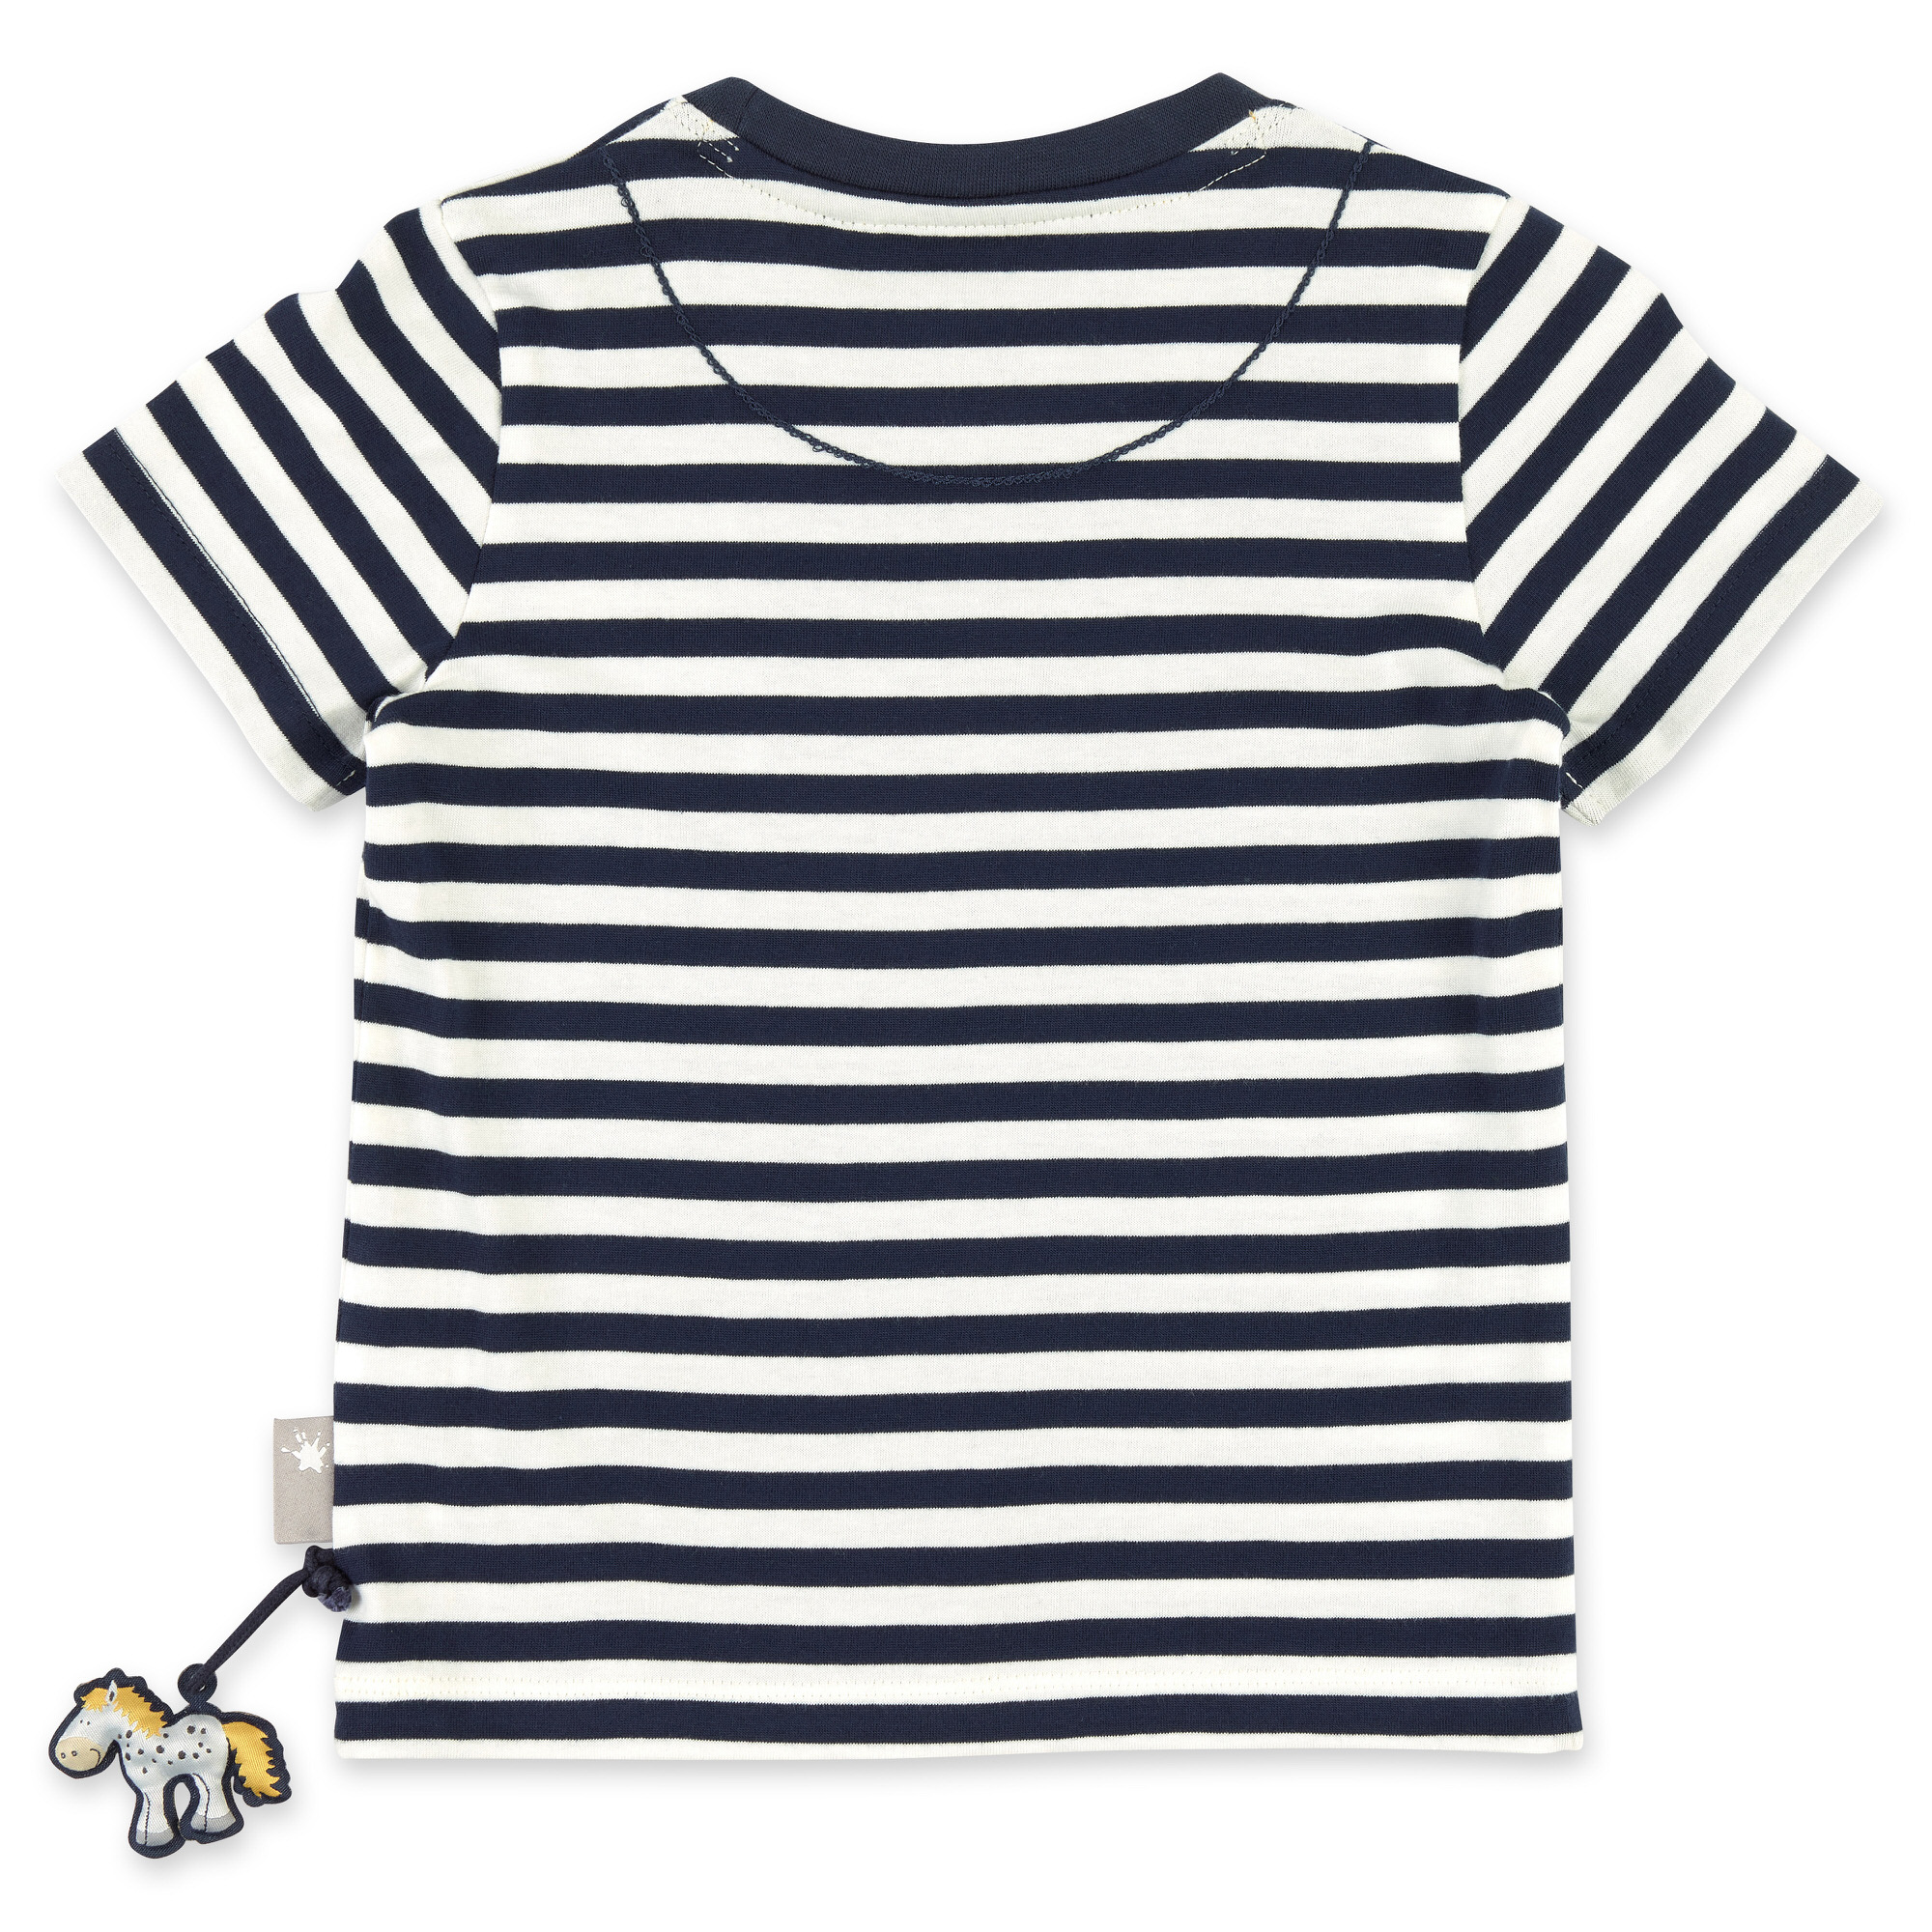 Navy/white striped kids' T-shirt with flower embroidery